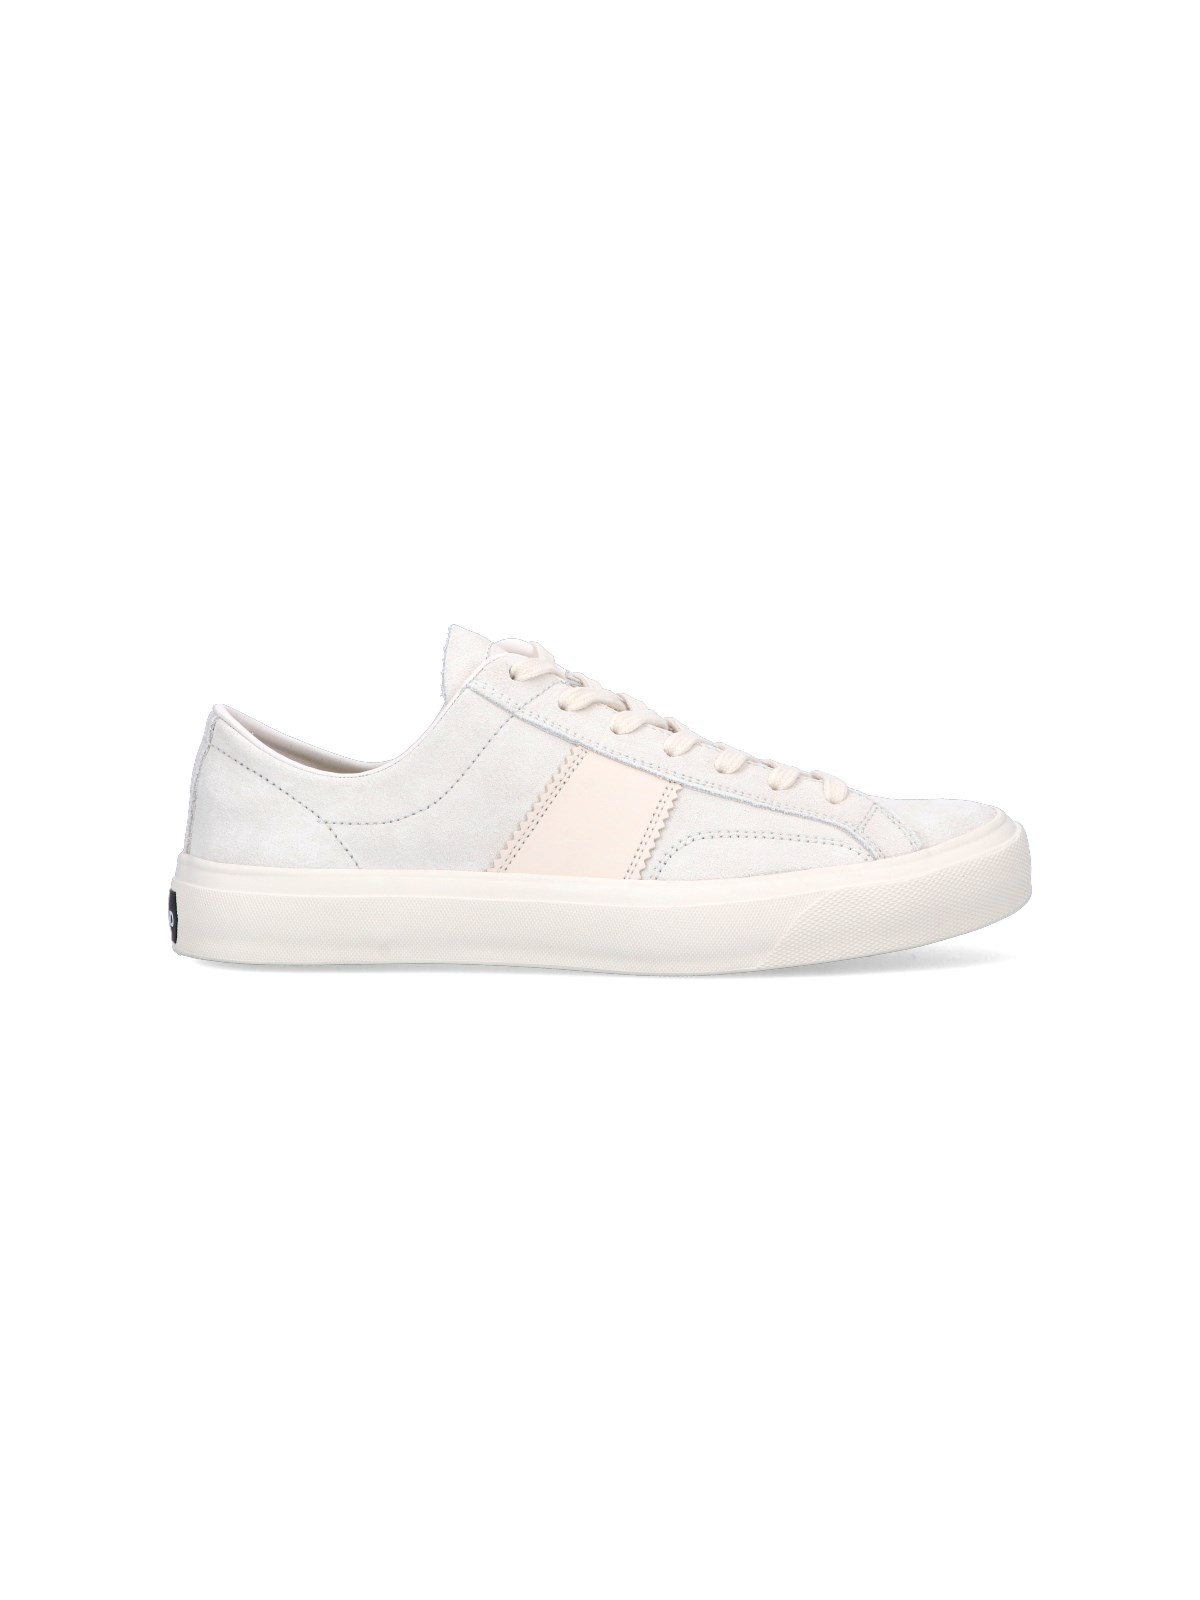 Tom Ford 'cambdridge' Trainers In White